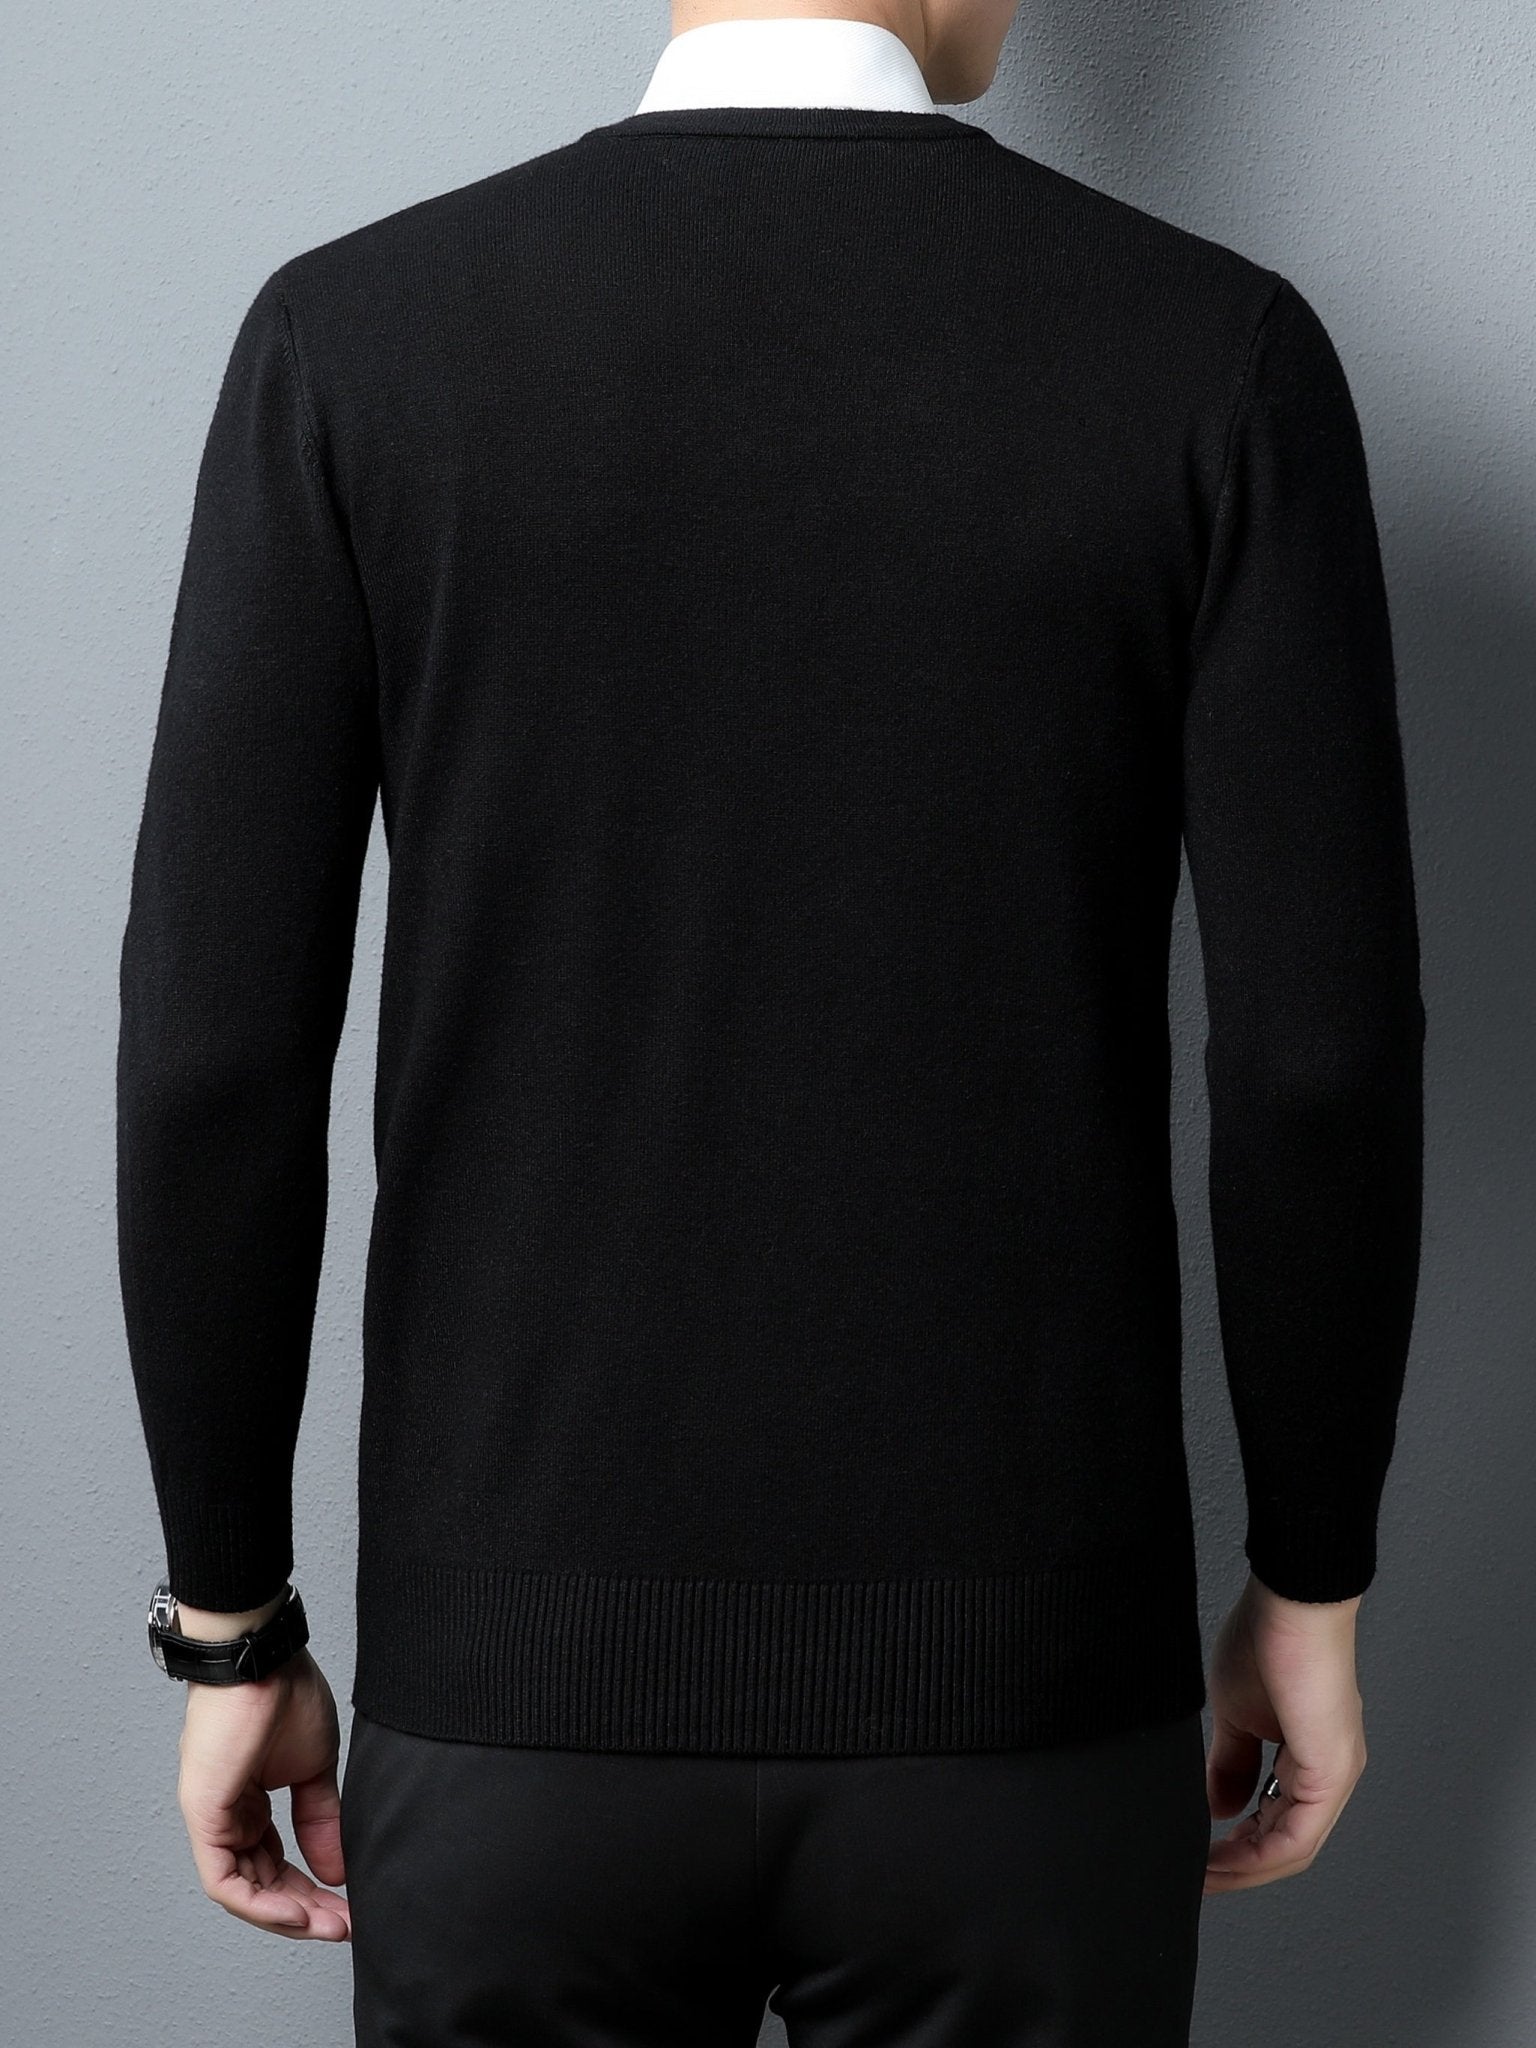 2024 Autumn Fashion: Men's Knitted V - neck Sweater - CasualFlowshop